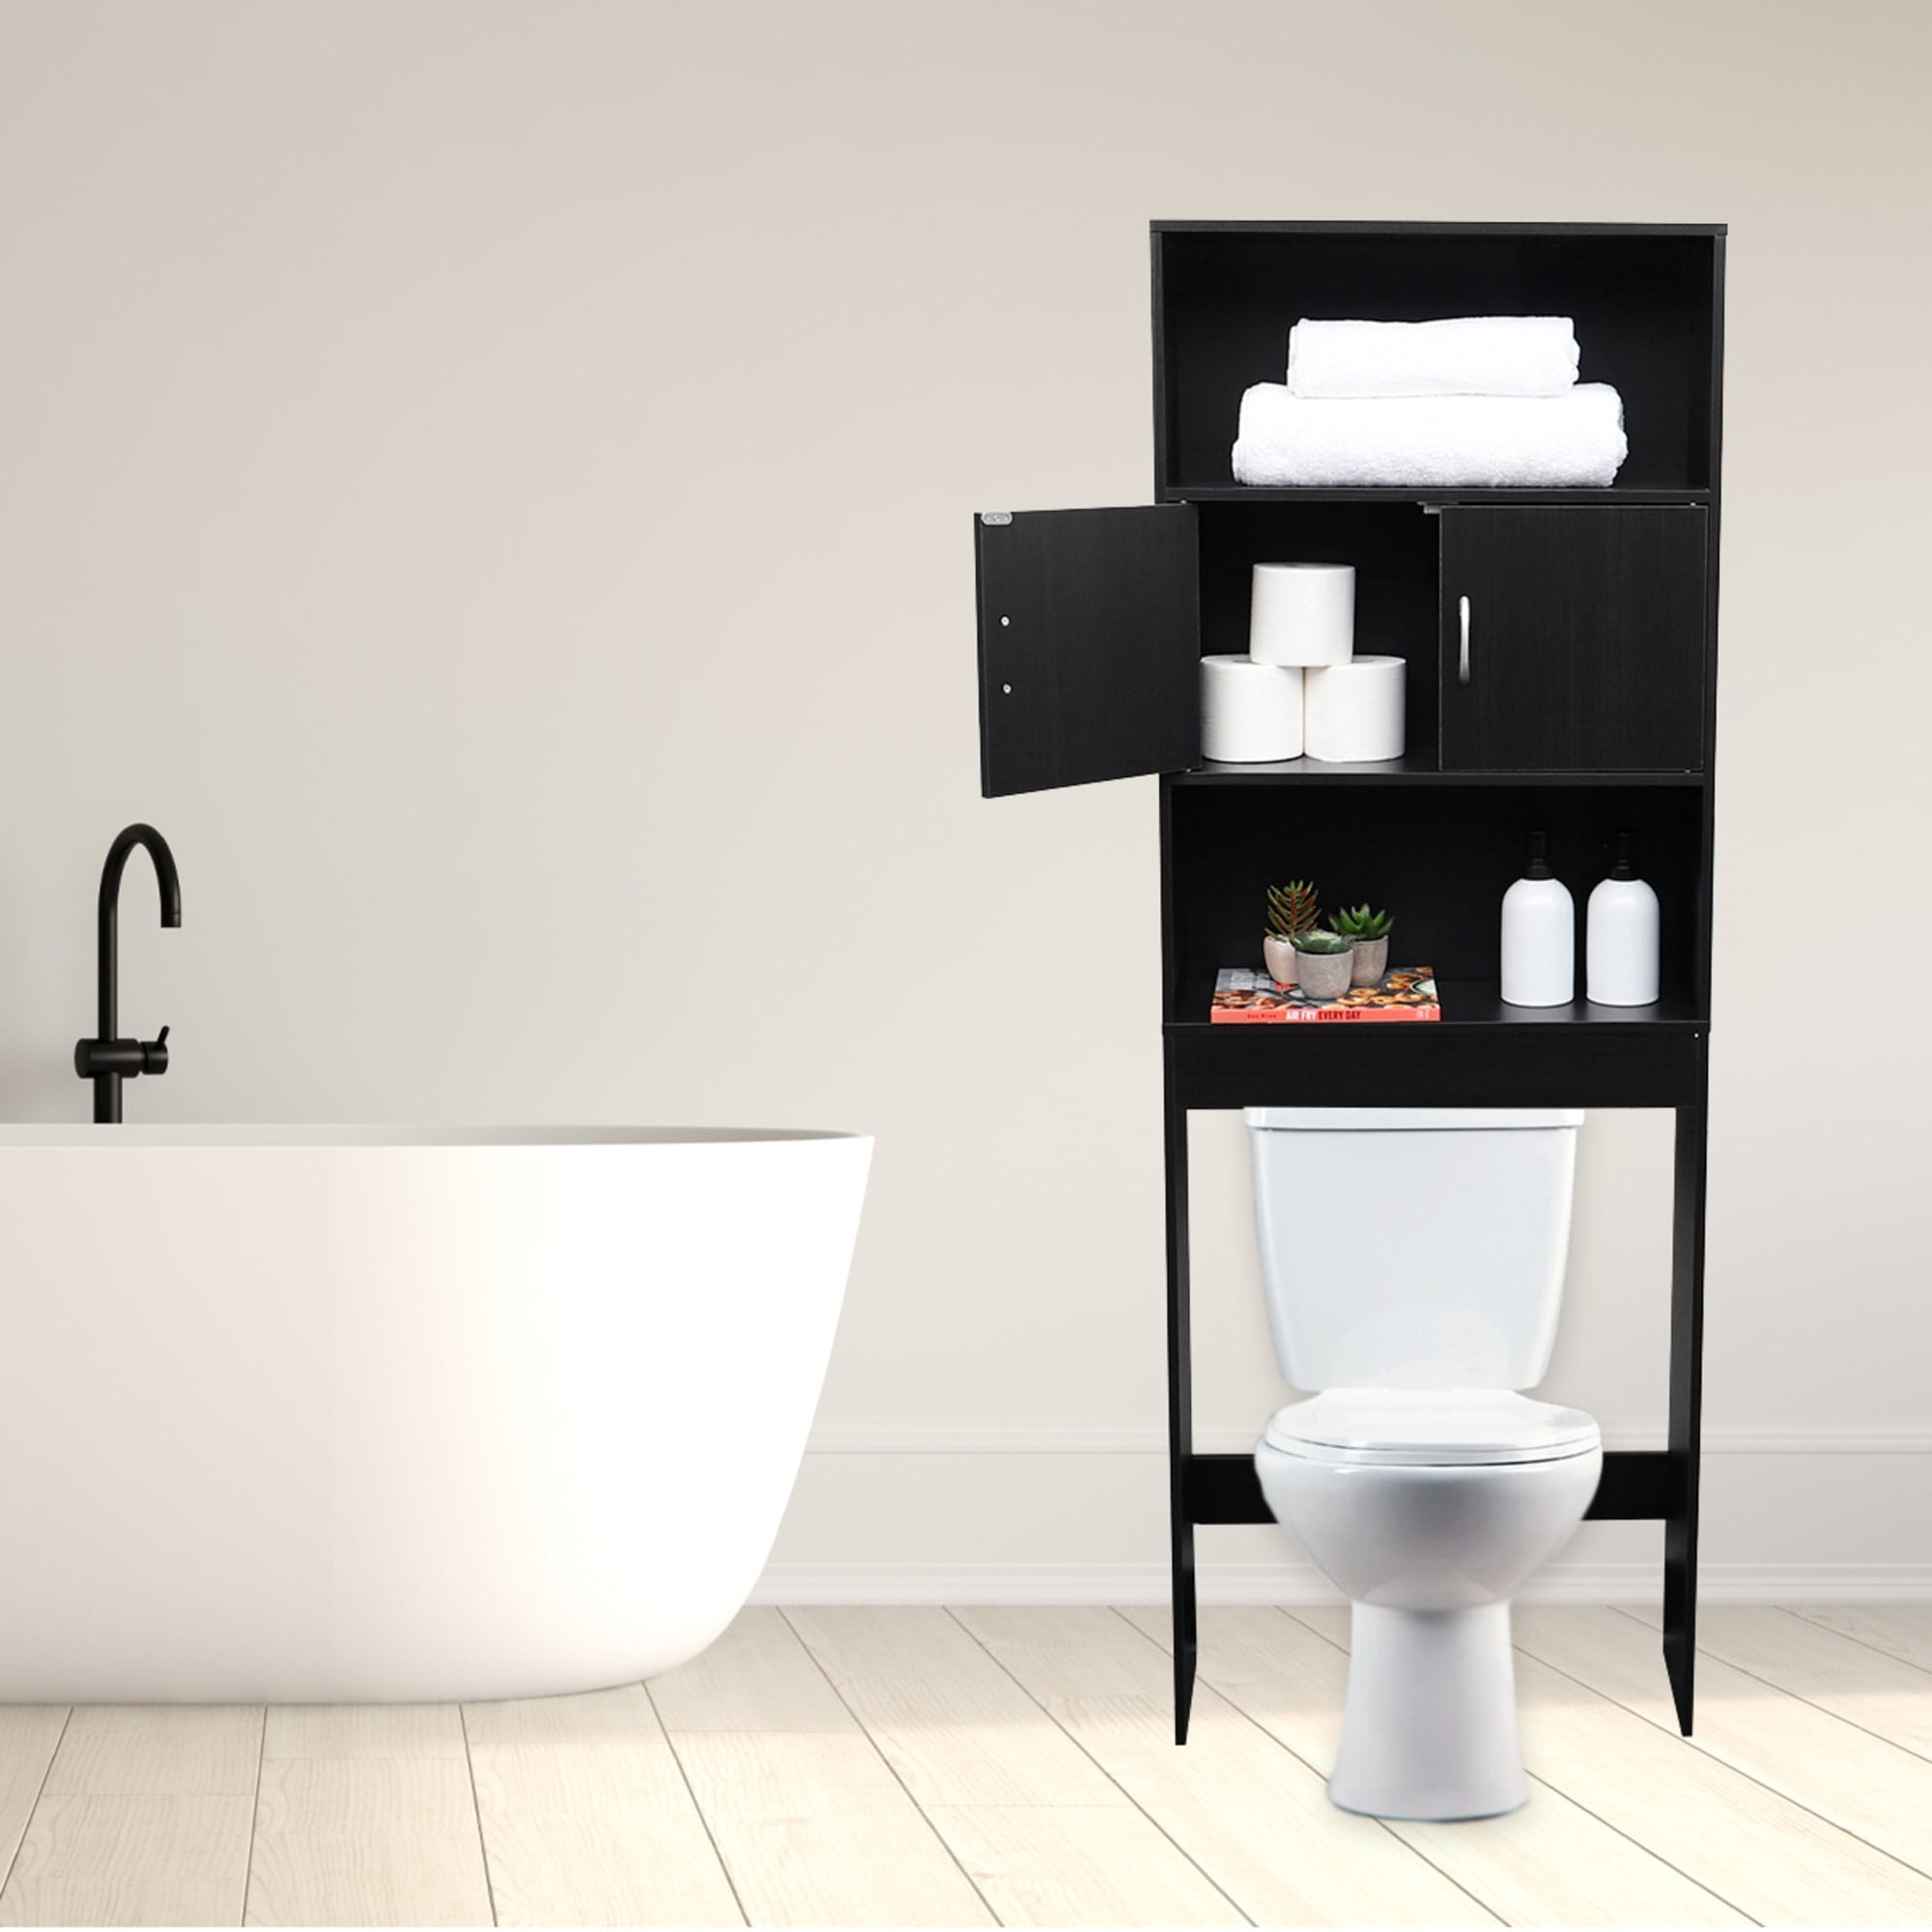 Home Basics  3 Tier Wood Space Saver Over the Toilet Bathroom Shelf  with Open Shelving and Cabinets, Espresso $60.00 EACH, CASE PACK OF 1